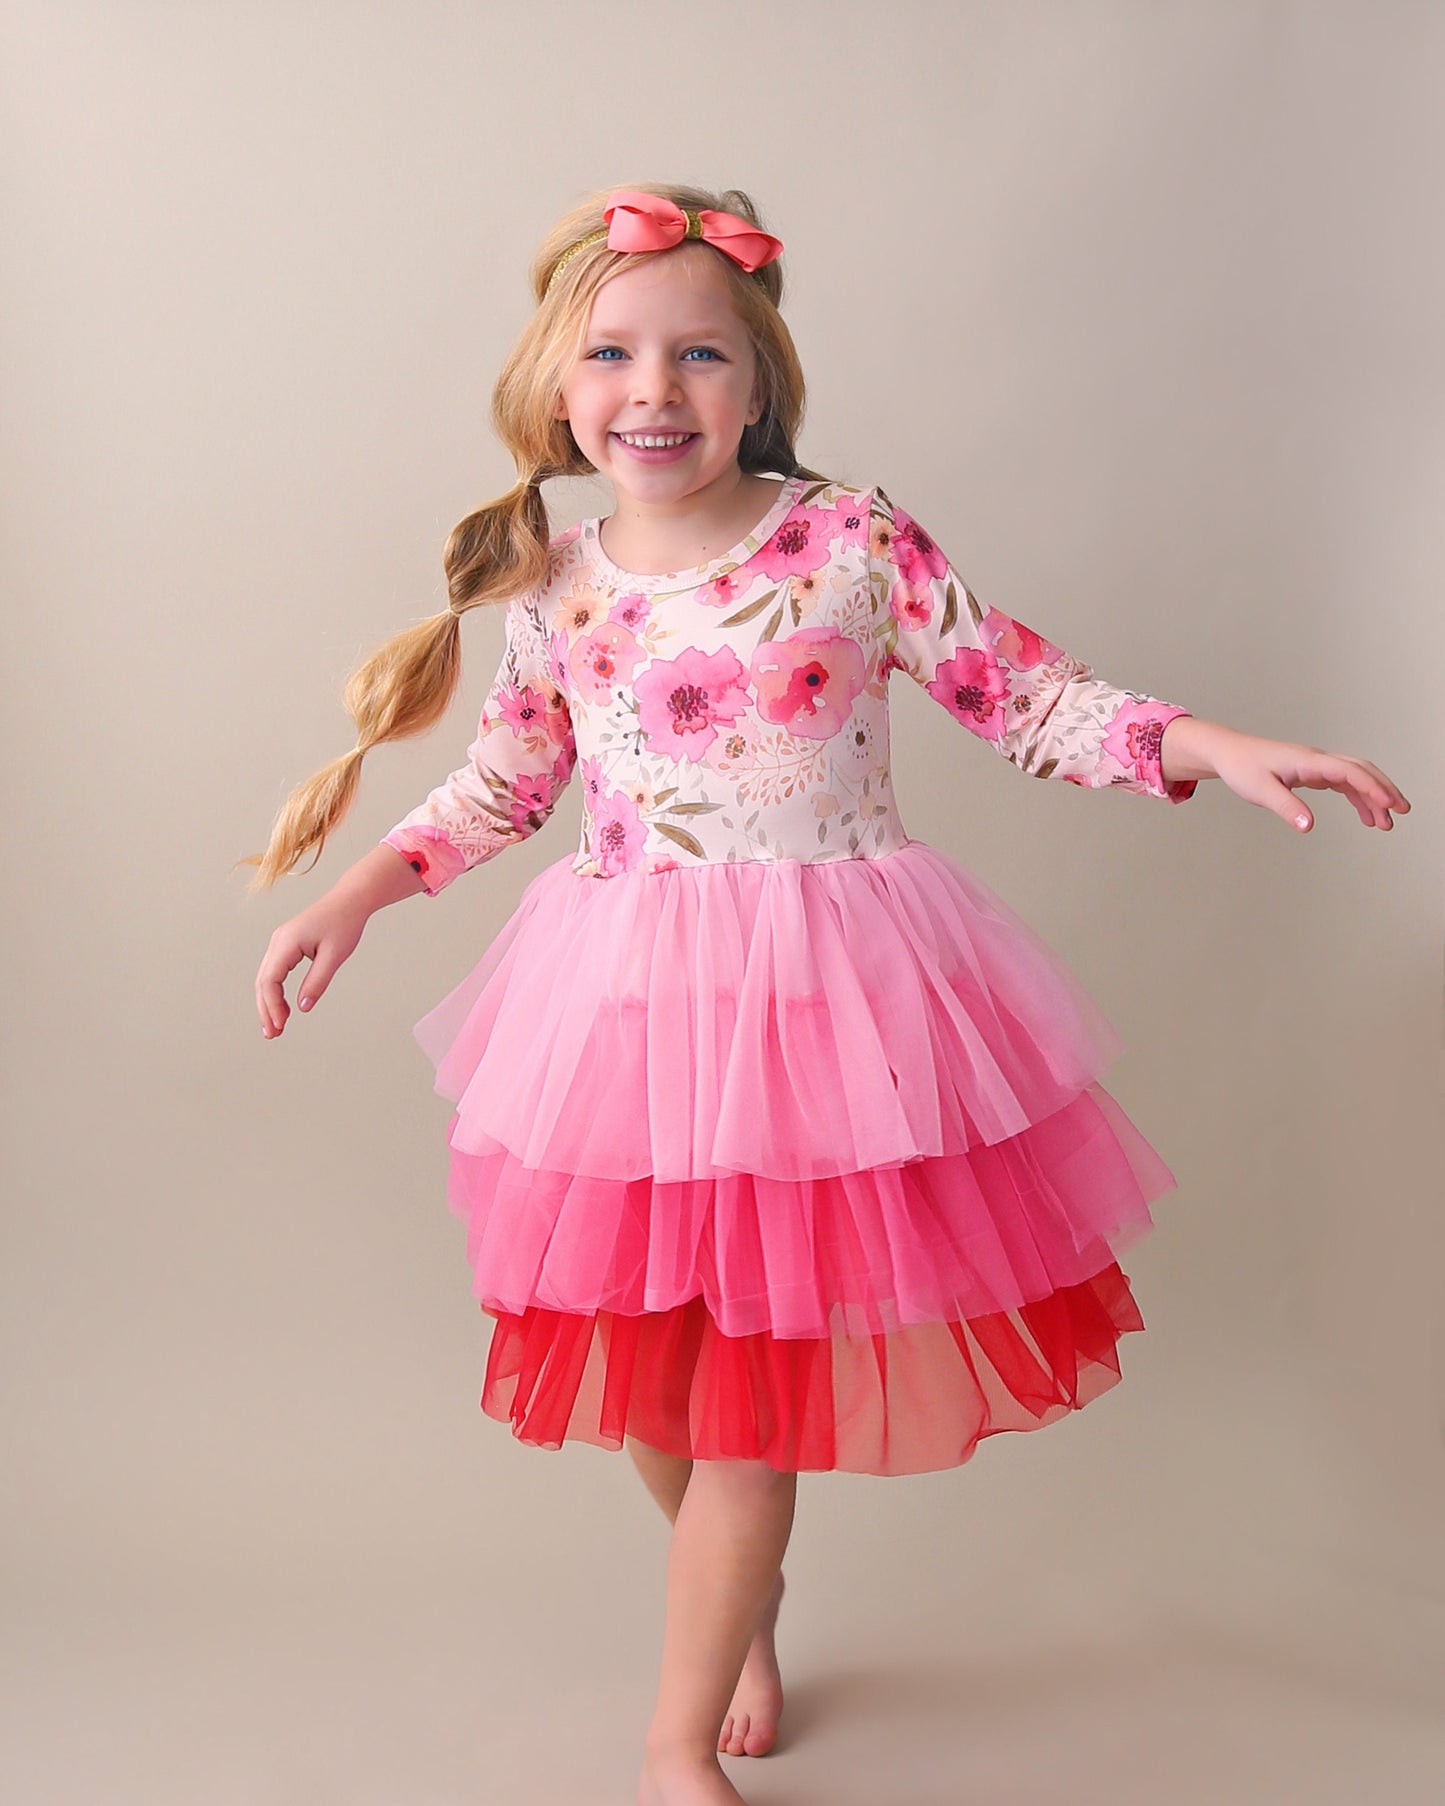 3/4 Sleeve Tutu Dress in Cream, Pink and Red Florals